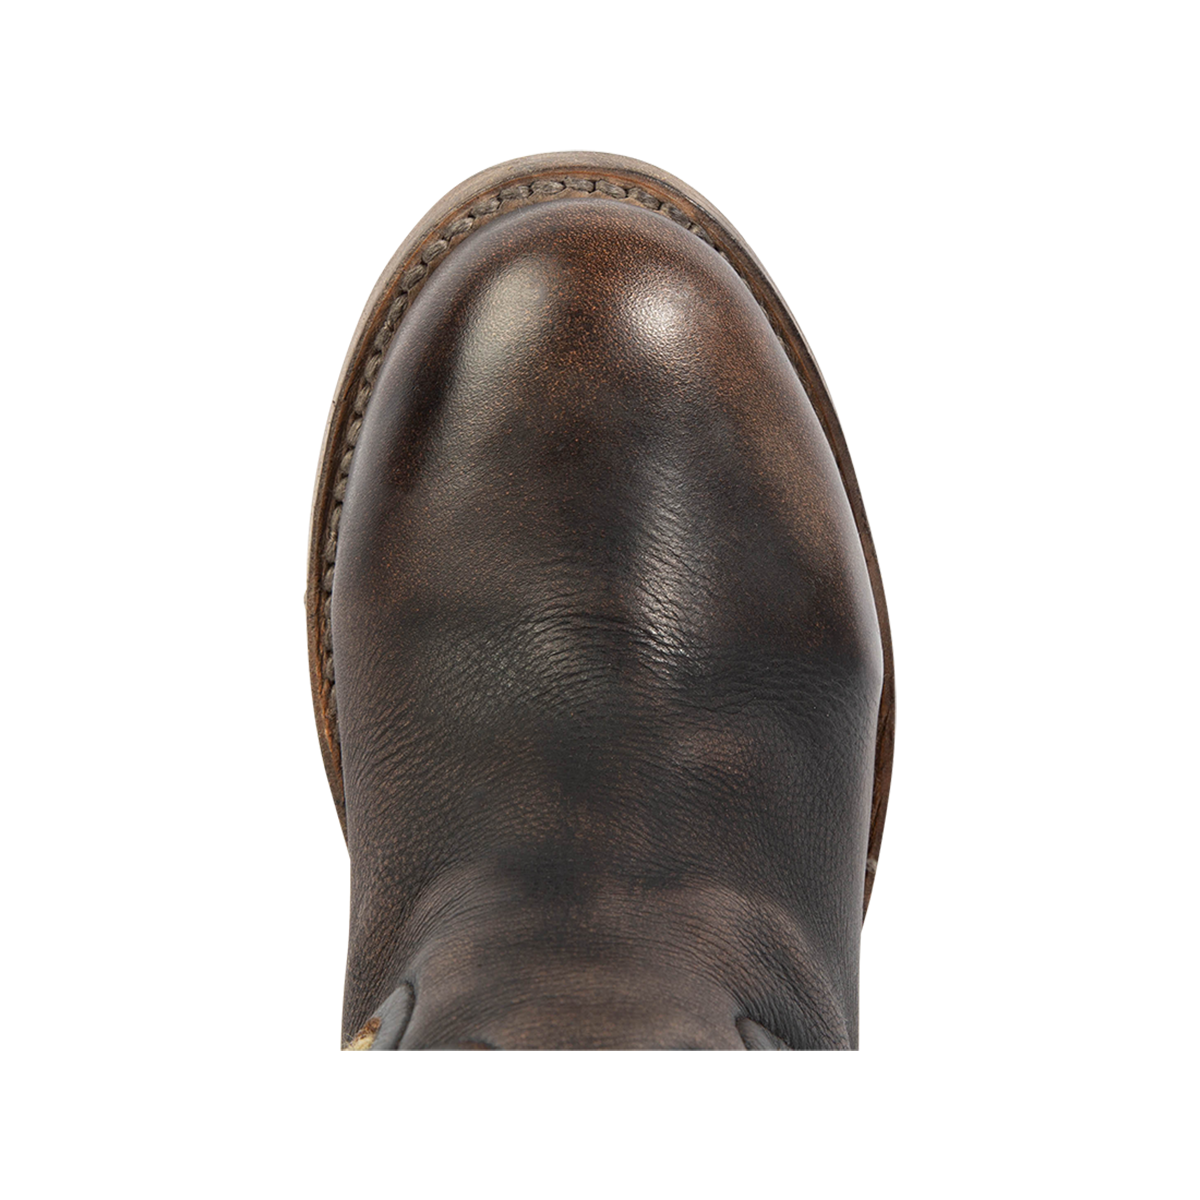 Top view showing a rounded toe and Goodyear welt on FREEBIRD women's Serape black leather knee high boot 